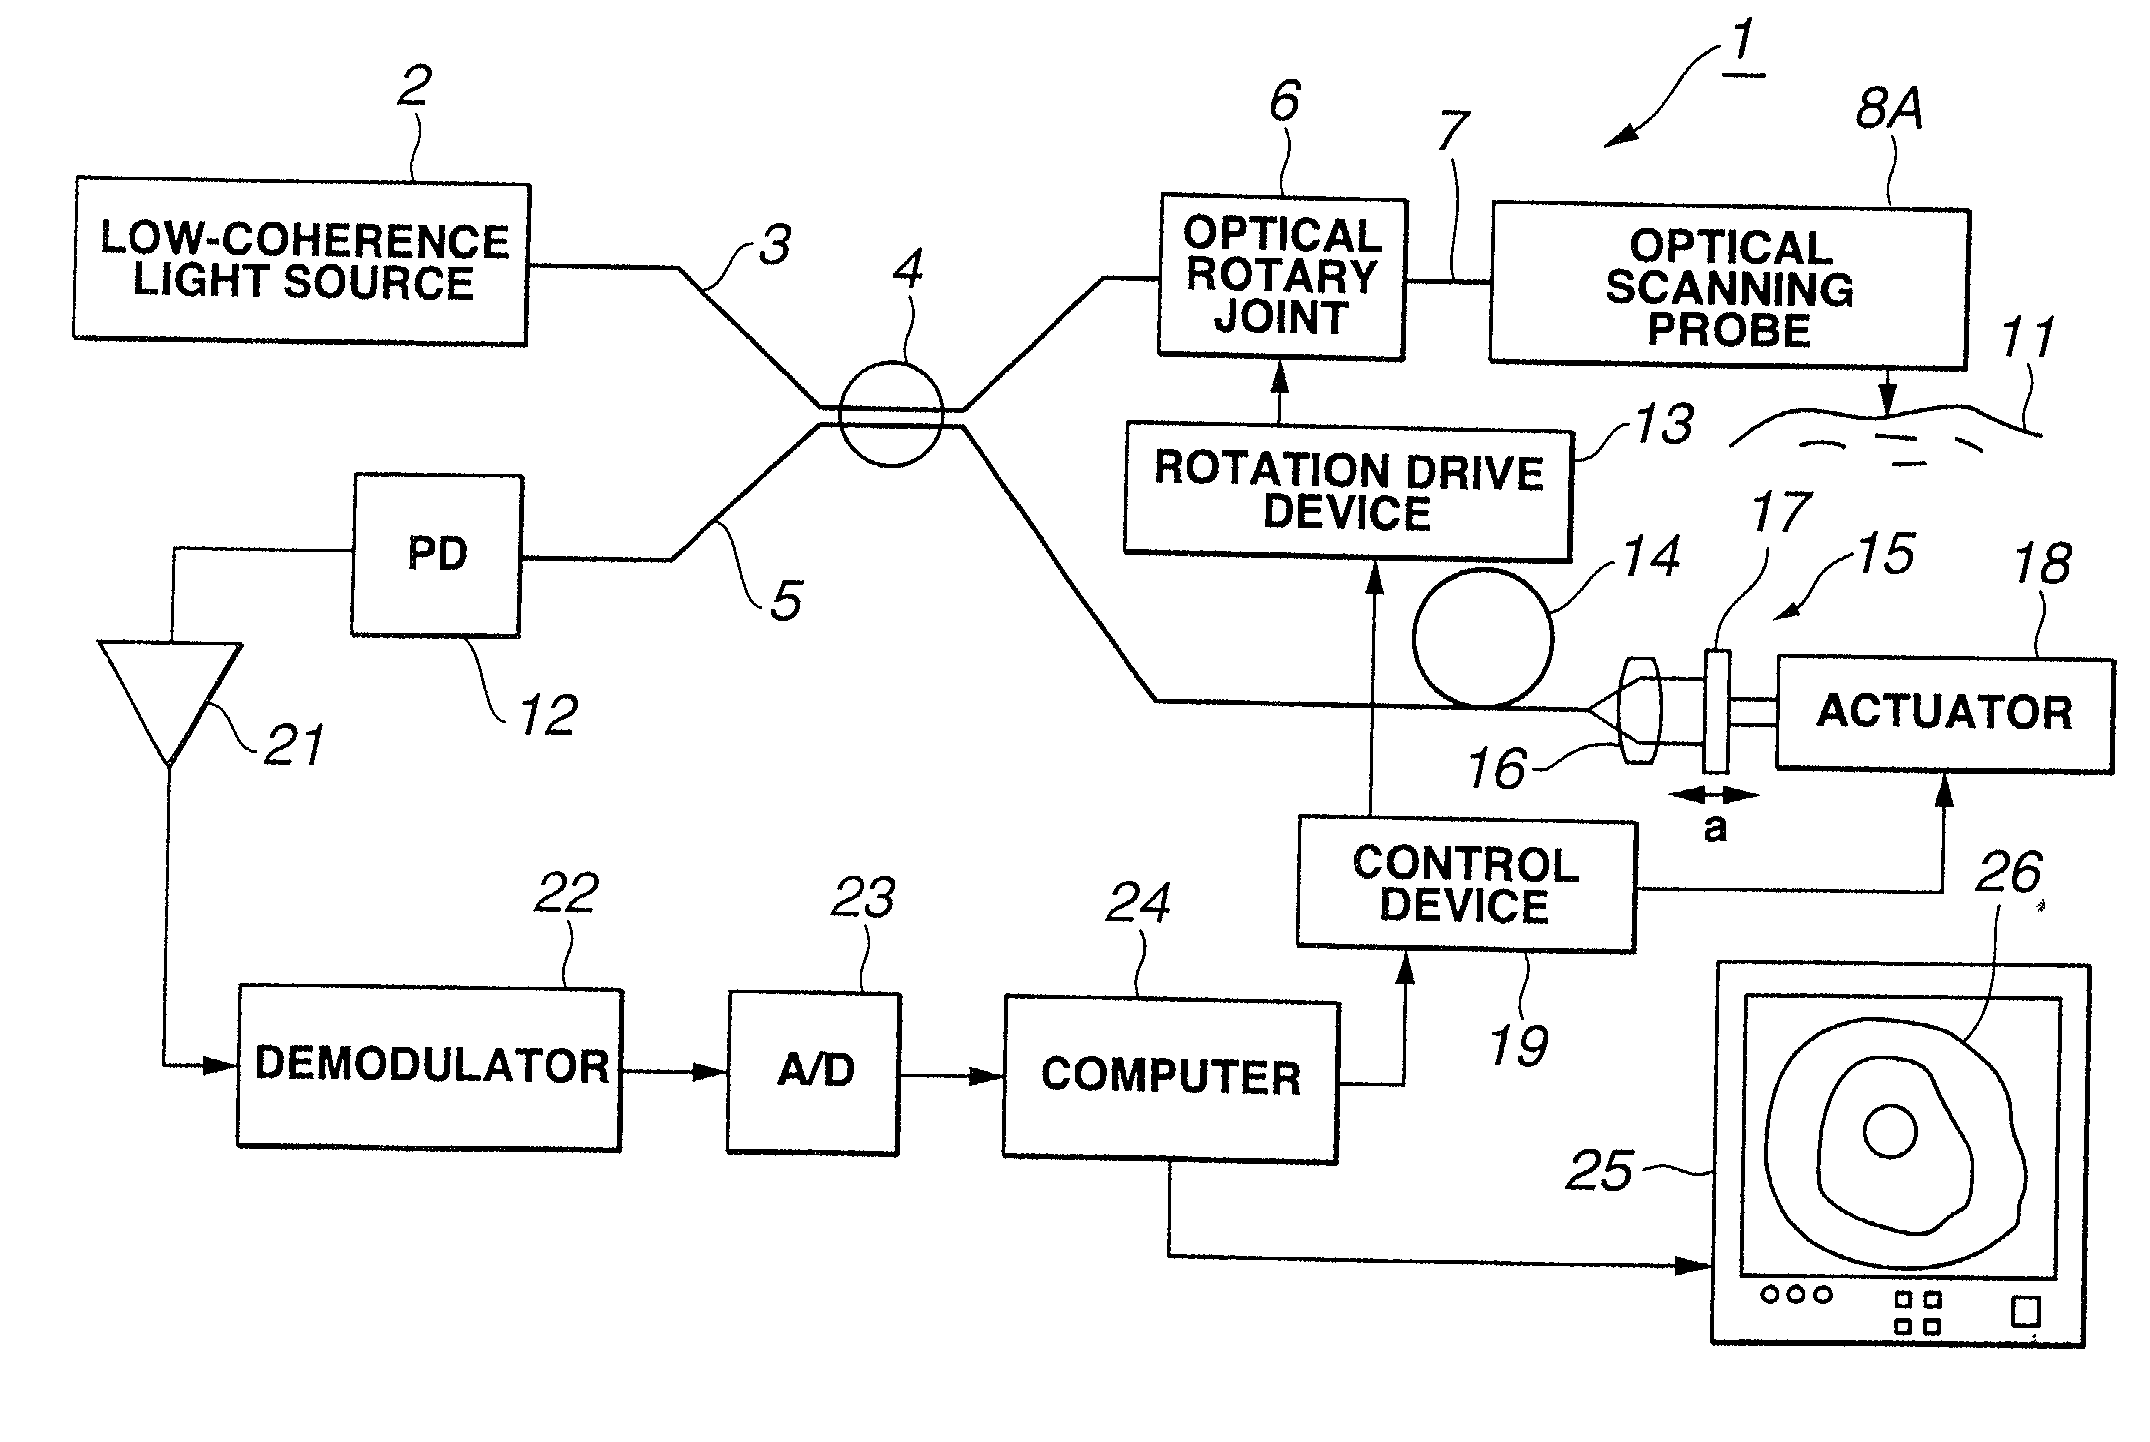 Optical scanning probe device using low coherence light